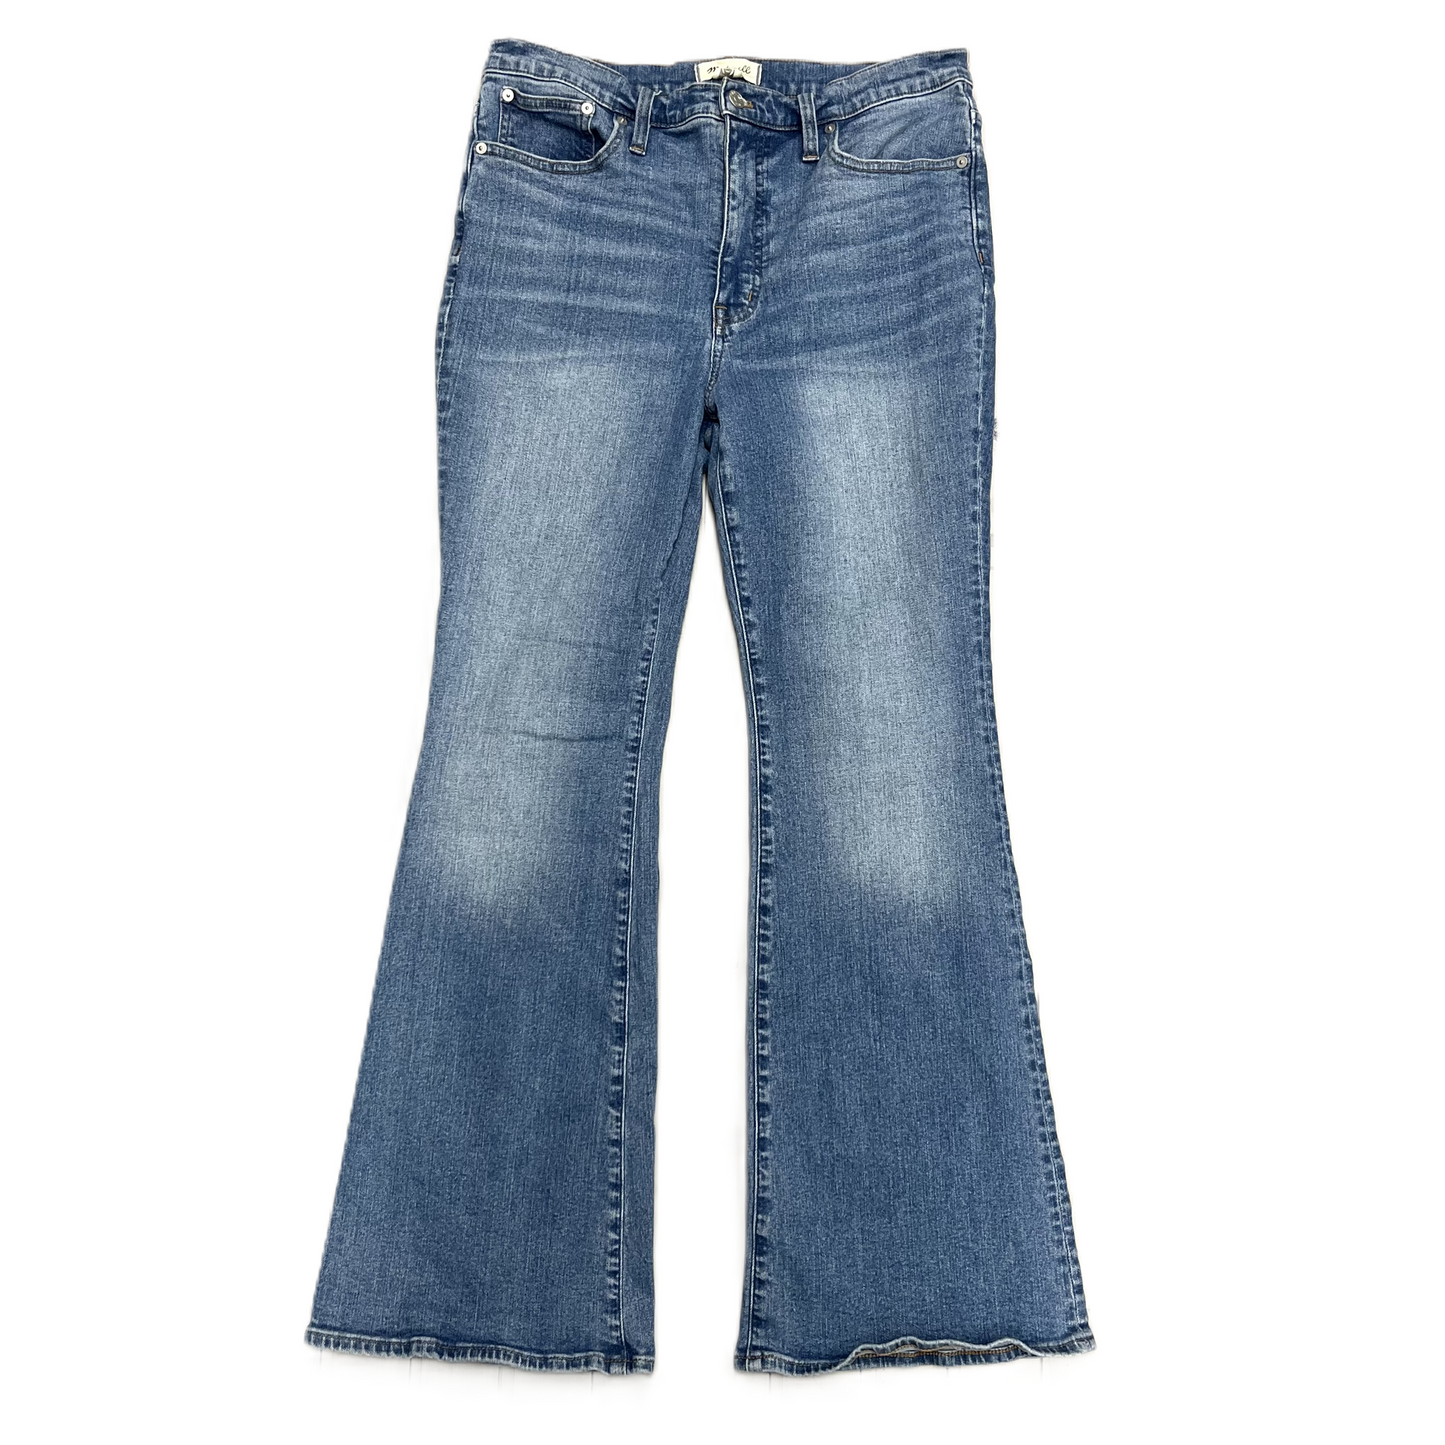 Blue Denim Jeans Flared By Madewell, Size: 12